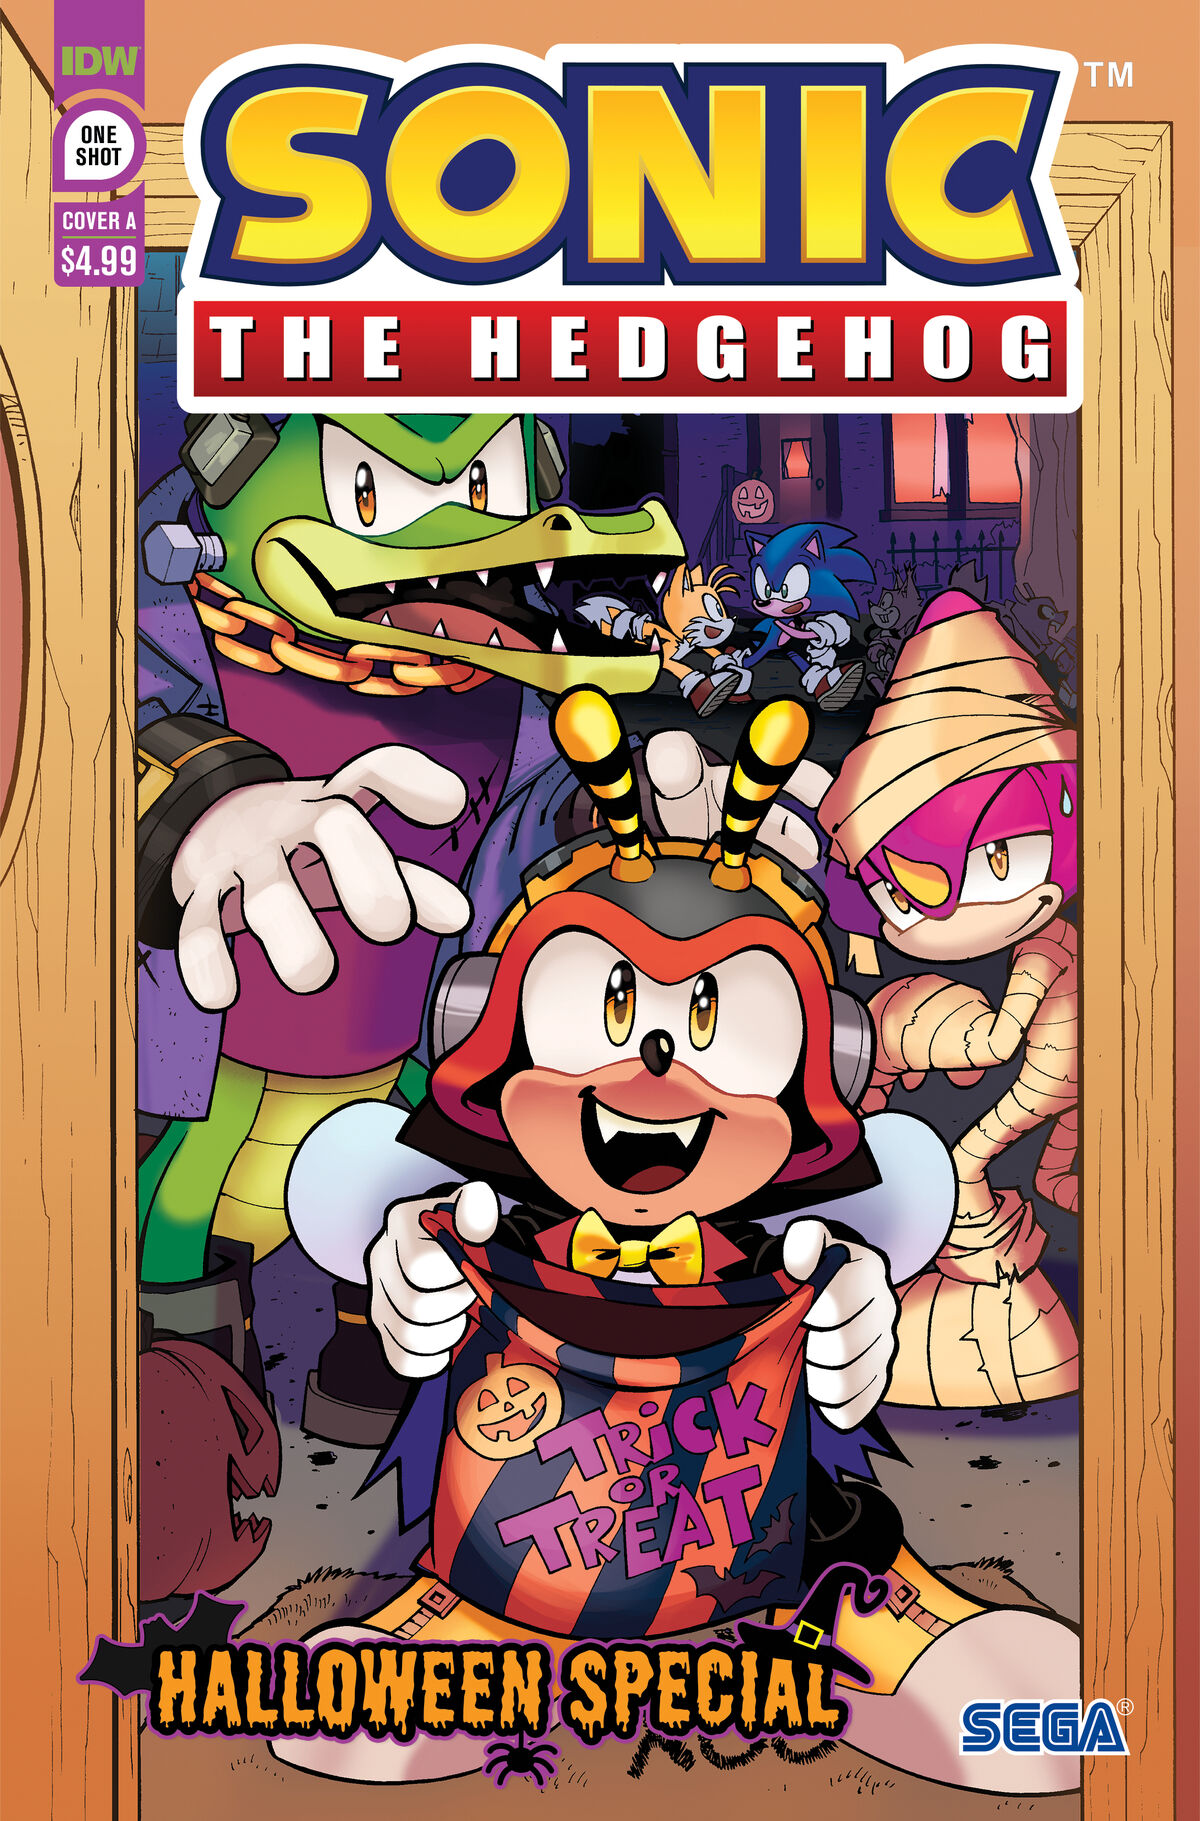 Sonic the Hedgehog: Amy's 30th Anniversary Special #1 - Comic Book